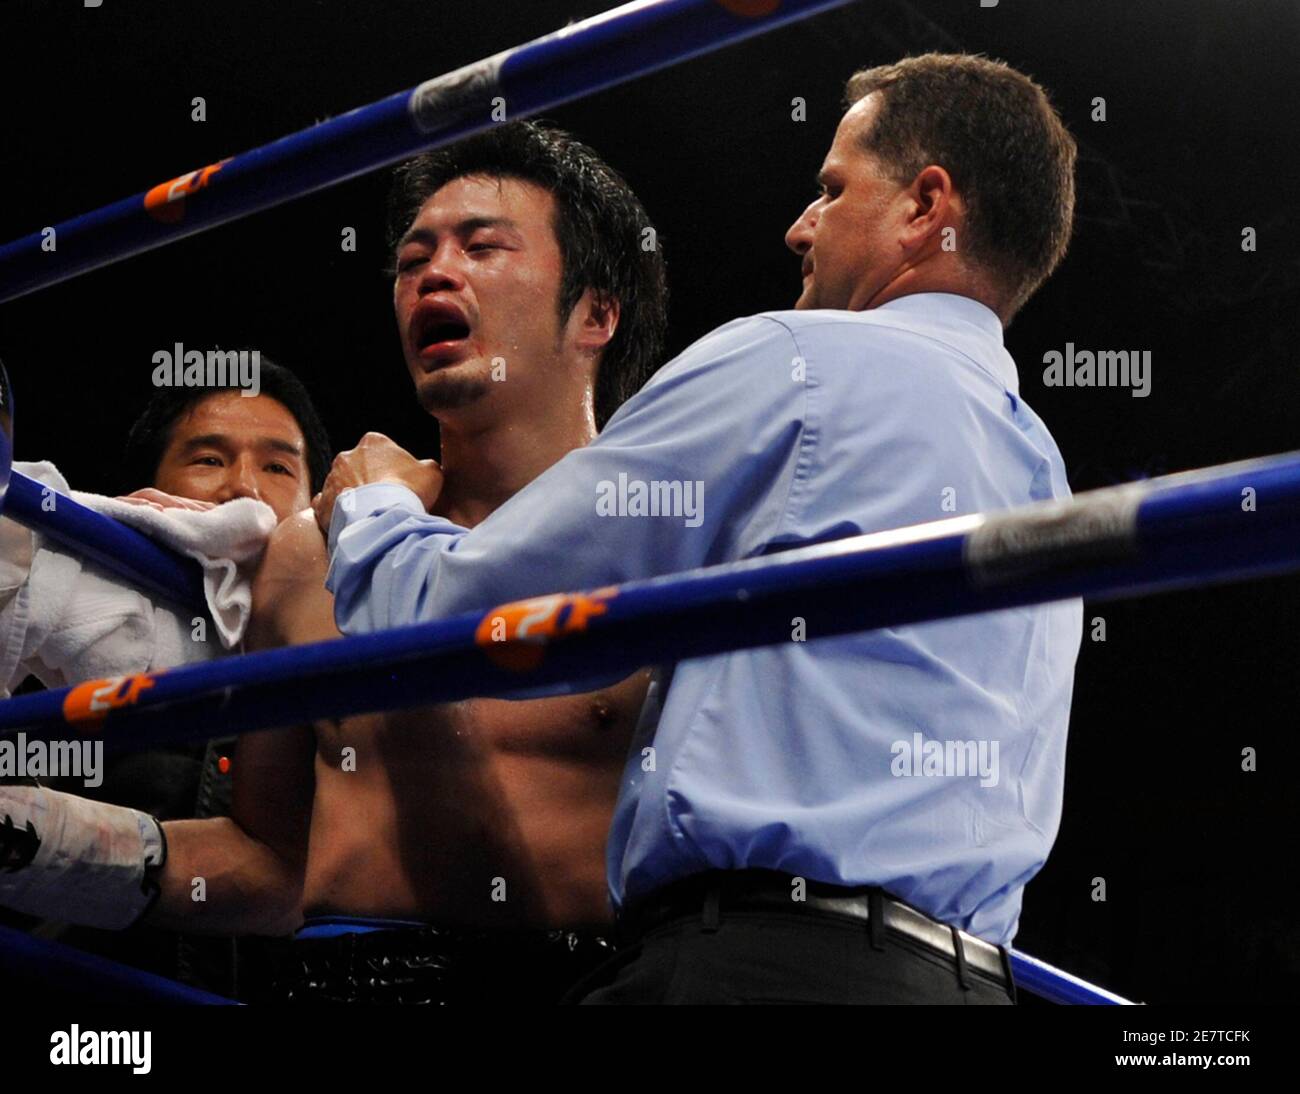 WBA referee Luis Pabon of Puerto Rico checks the condition of Japan's Koji Sato (C) before finishing Sato's WBA middleweight fight against Germany's Felix Sturm in the western German city of Krefeld near Duesseldorf April 25, 2009. Sturm beat Sato by technical knock-out in the seventh round. REUTERS/Wolfgang Rattay (GERMANY SPORT BOXING) Stock Photo